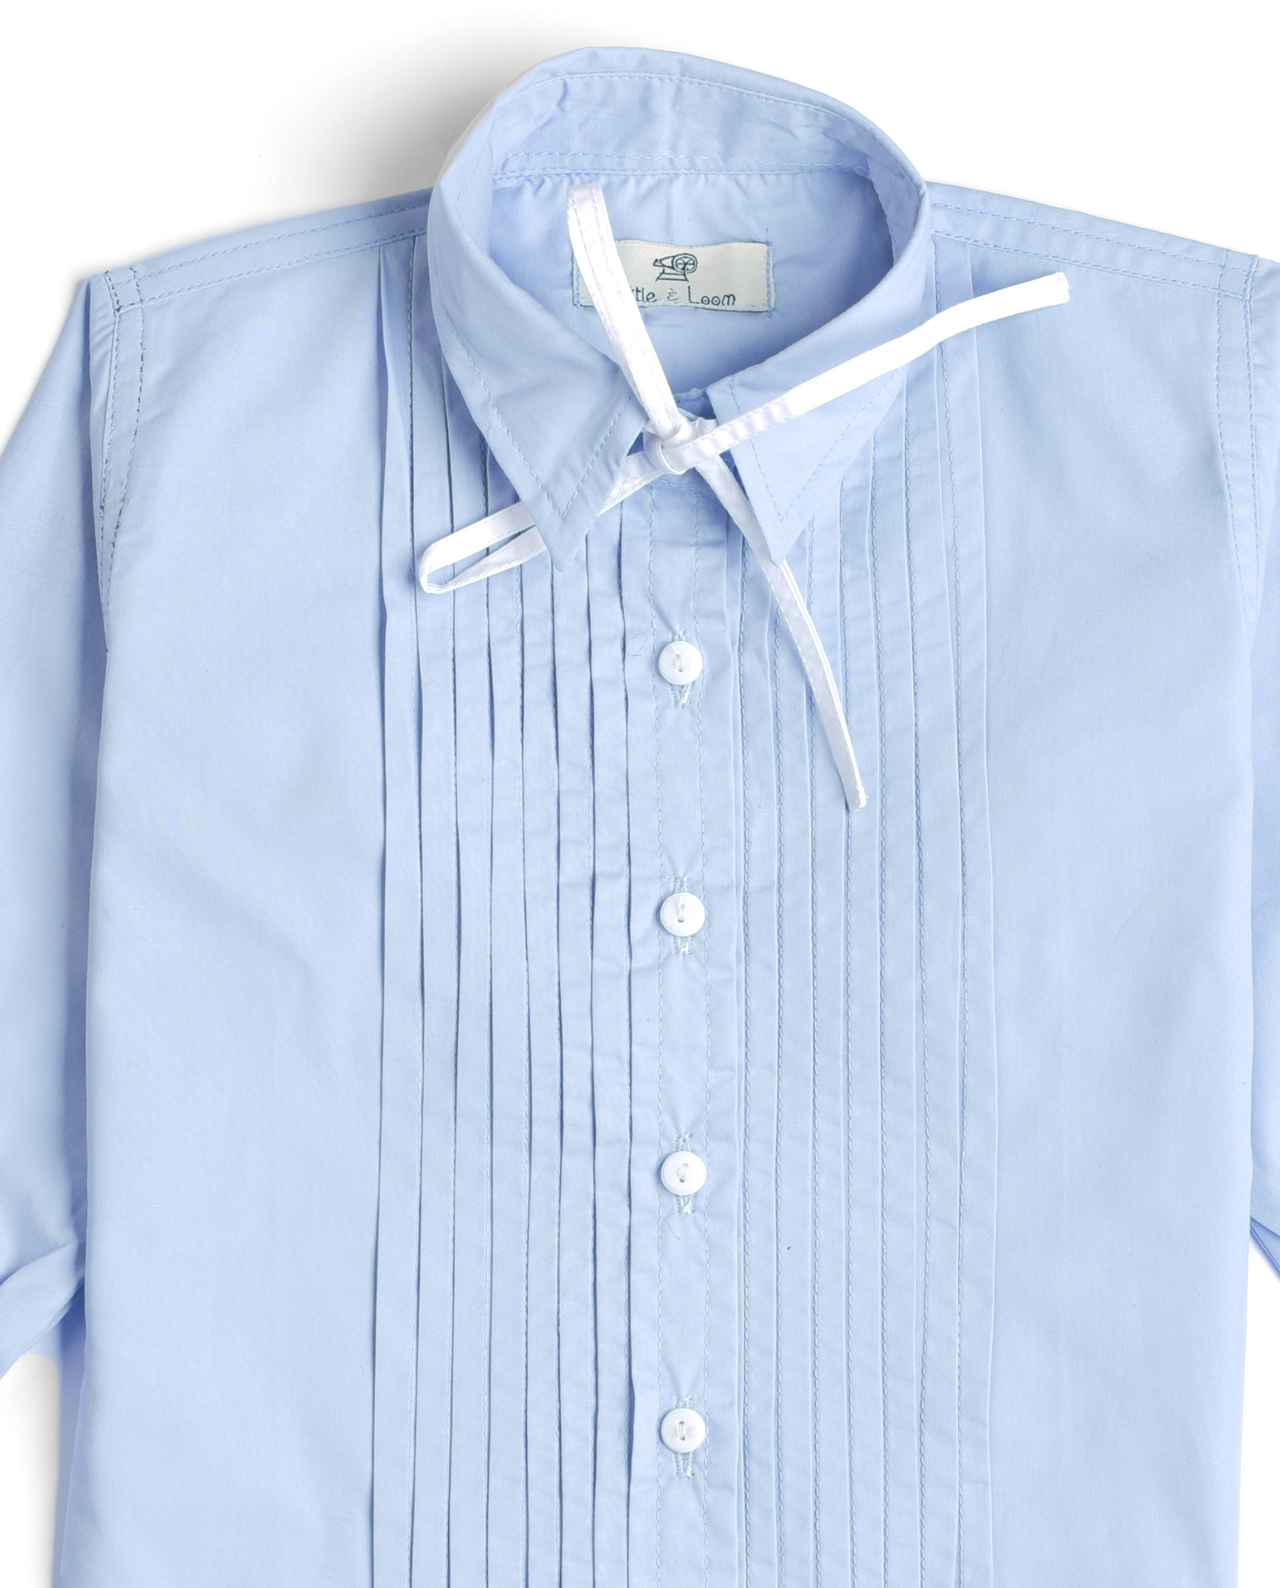 LIGHT BLUE PLEATED SHIRT WITH WHITE RIBBON